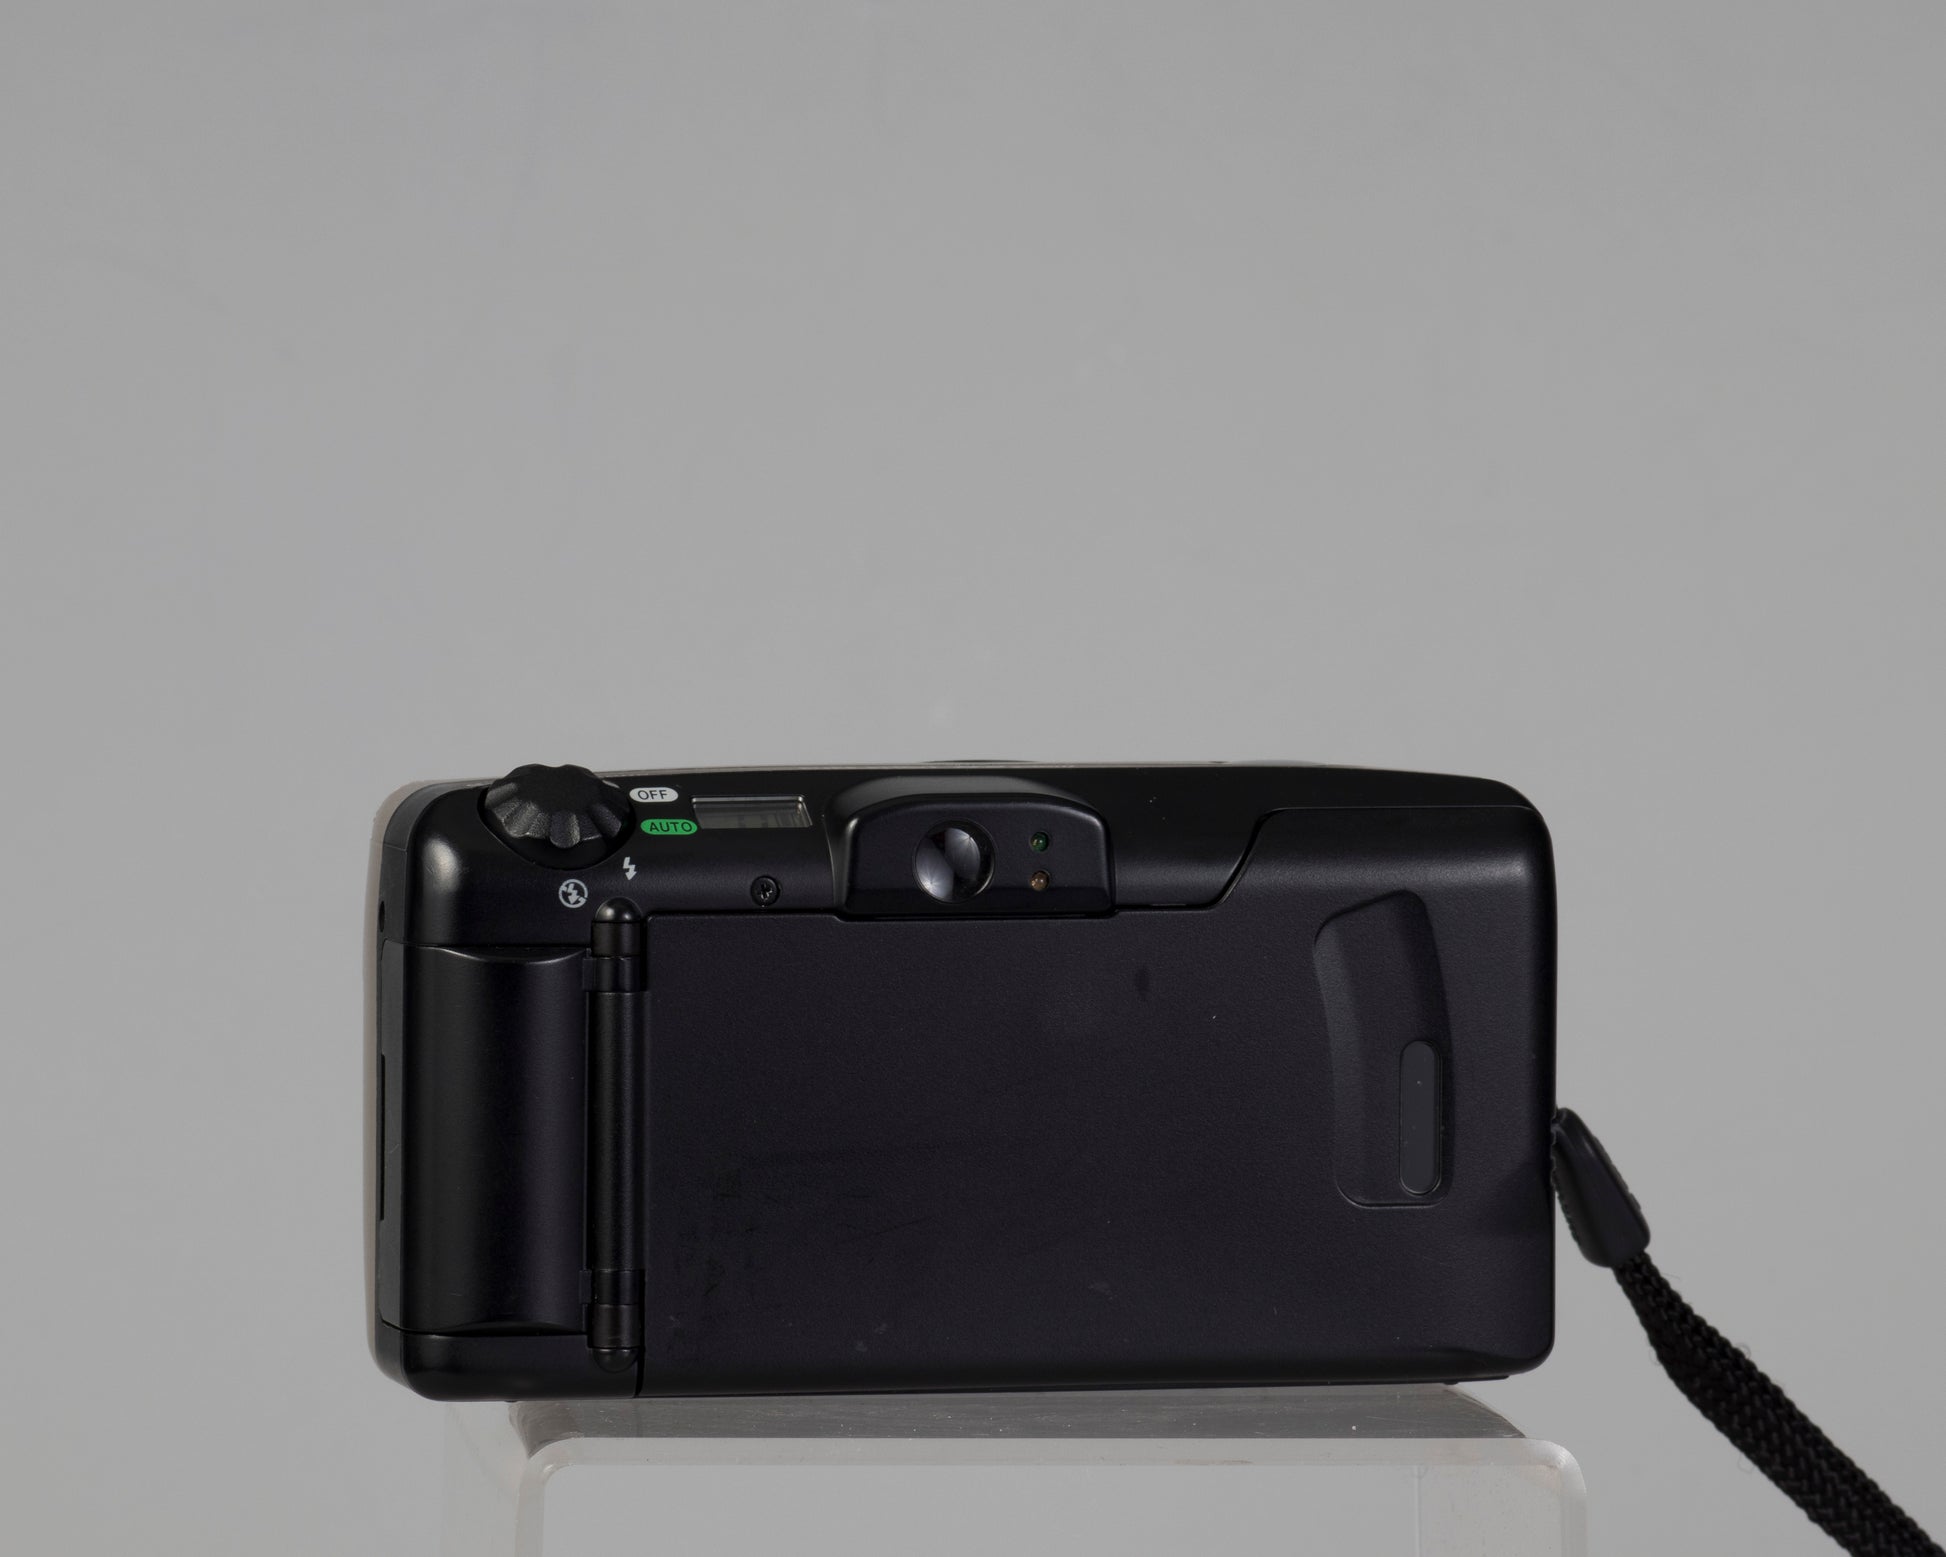 Canon Sure Shot 85 Zoom (back view)